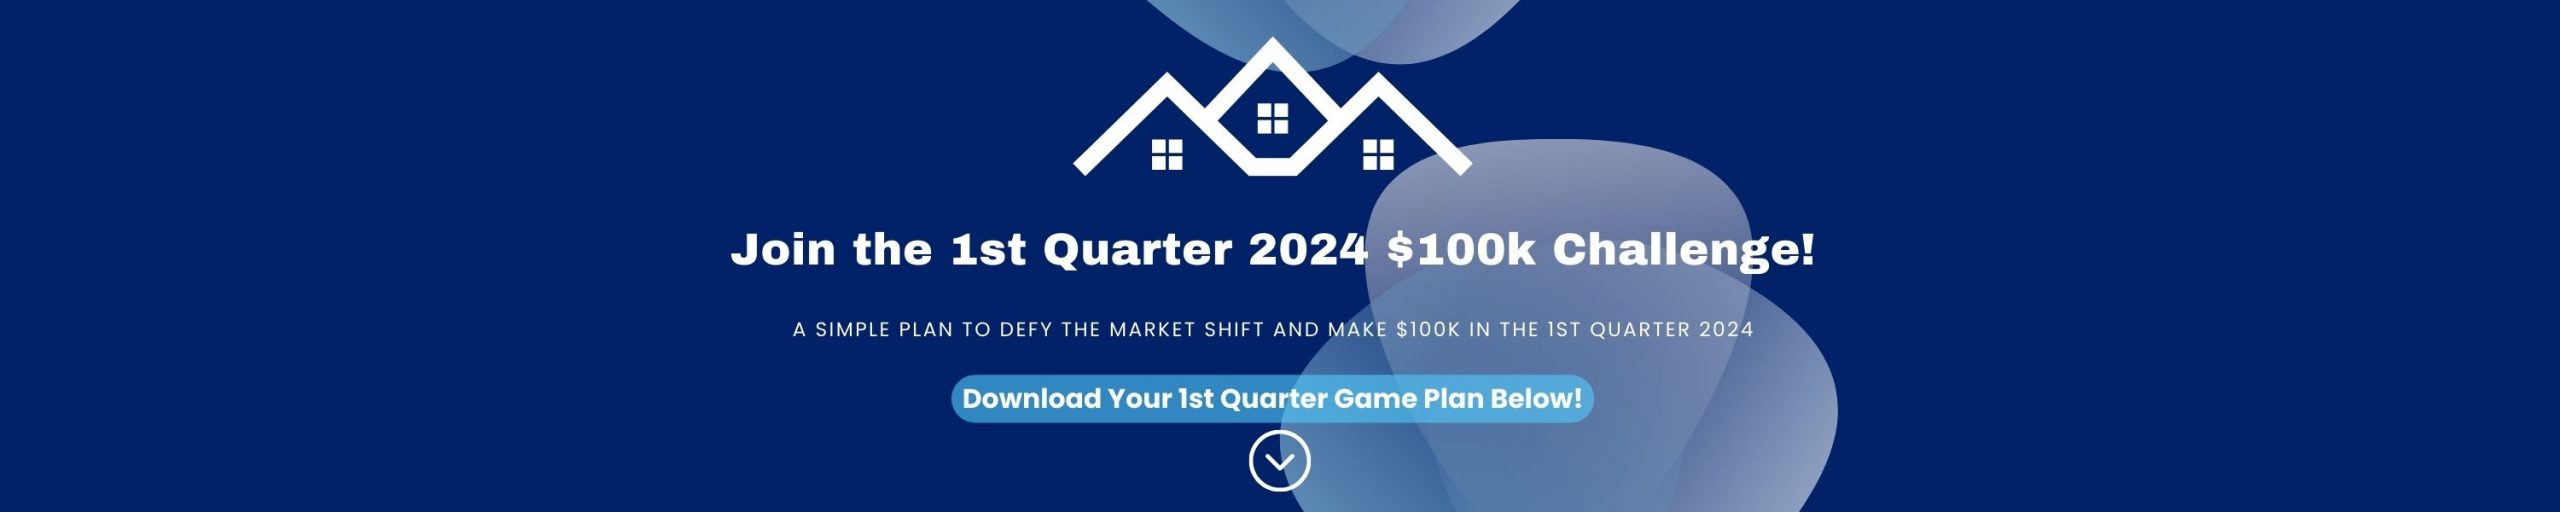 Join the 4th Quarter 2022 $100,000 Challenge! (1540 × 450 px) (2)